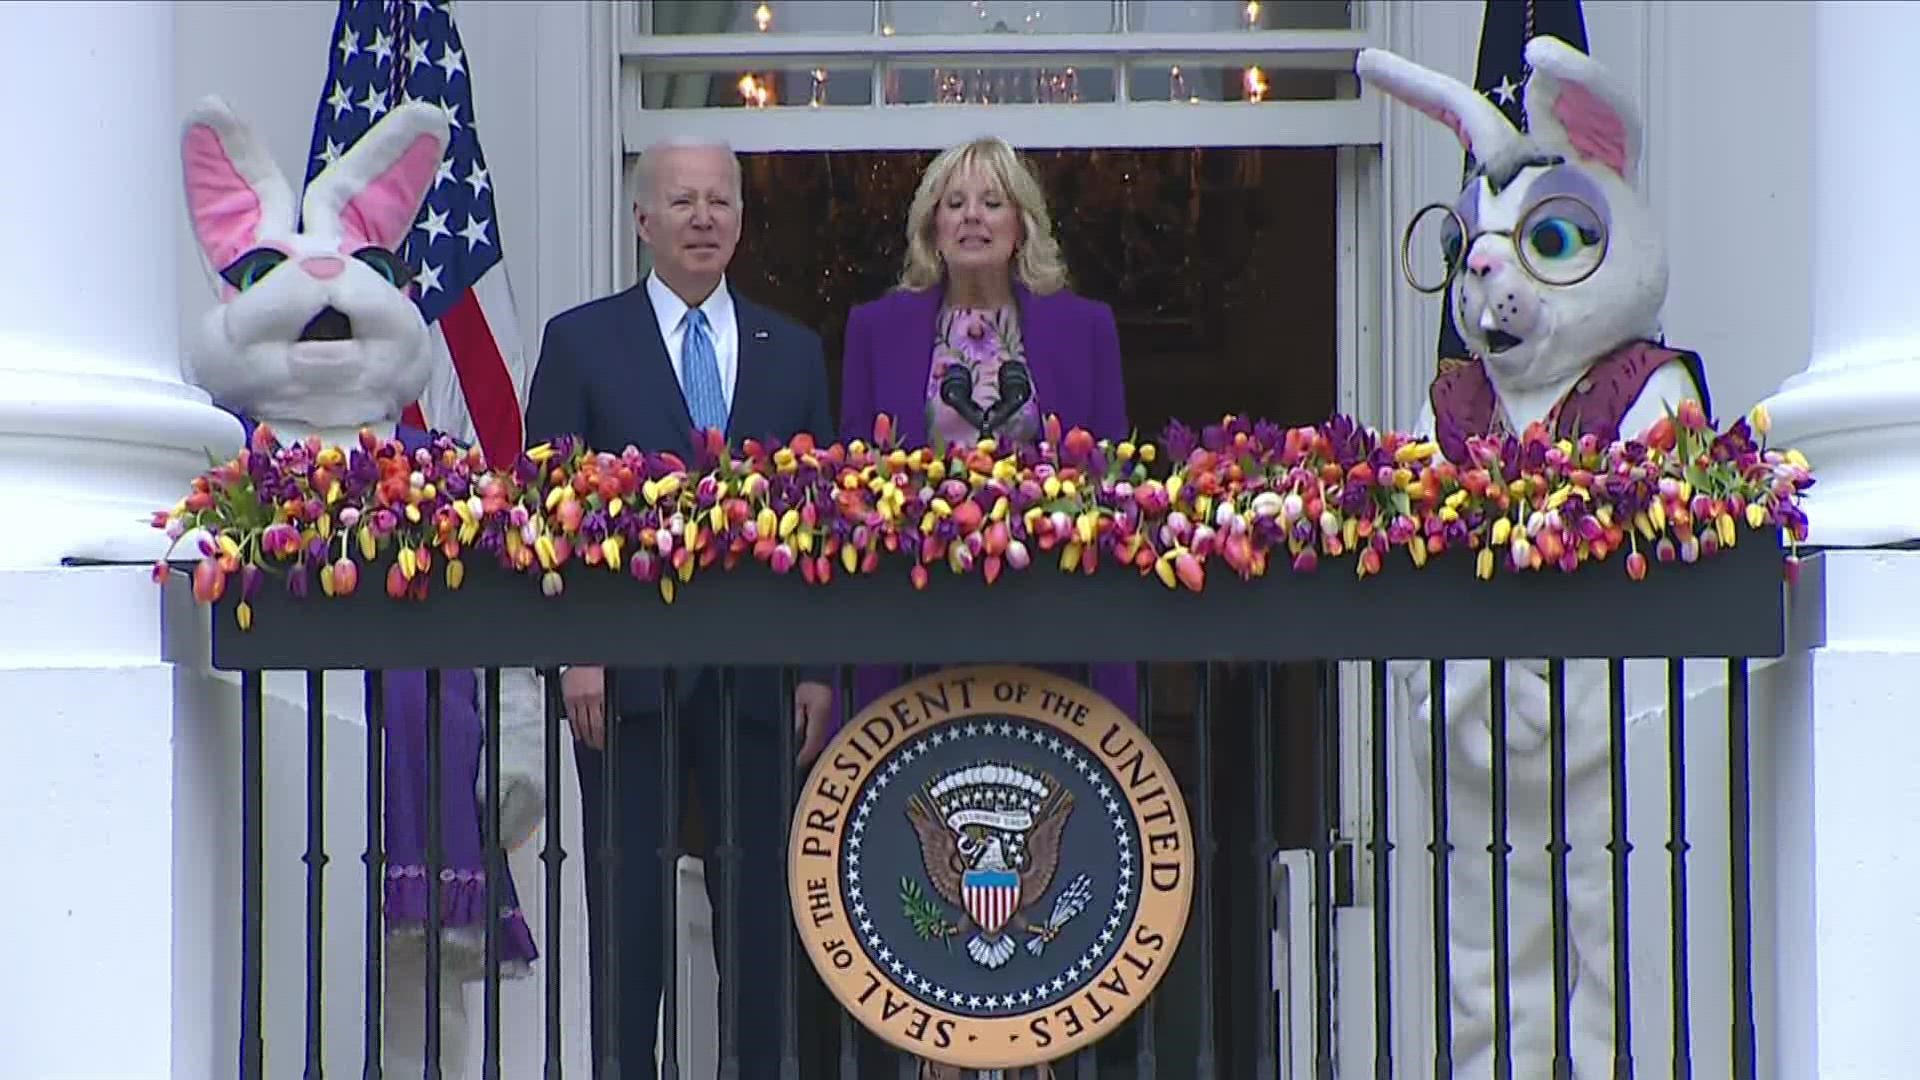 Under rainy skies Monday, President Joe Biden and his wife, Jill, were hosting some 30,000 kids and adults for the event.